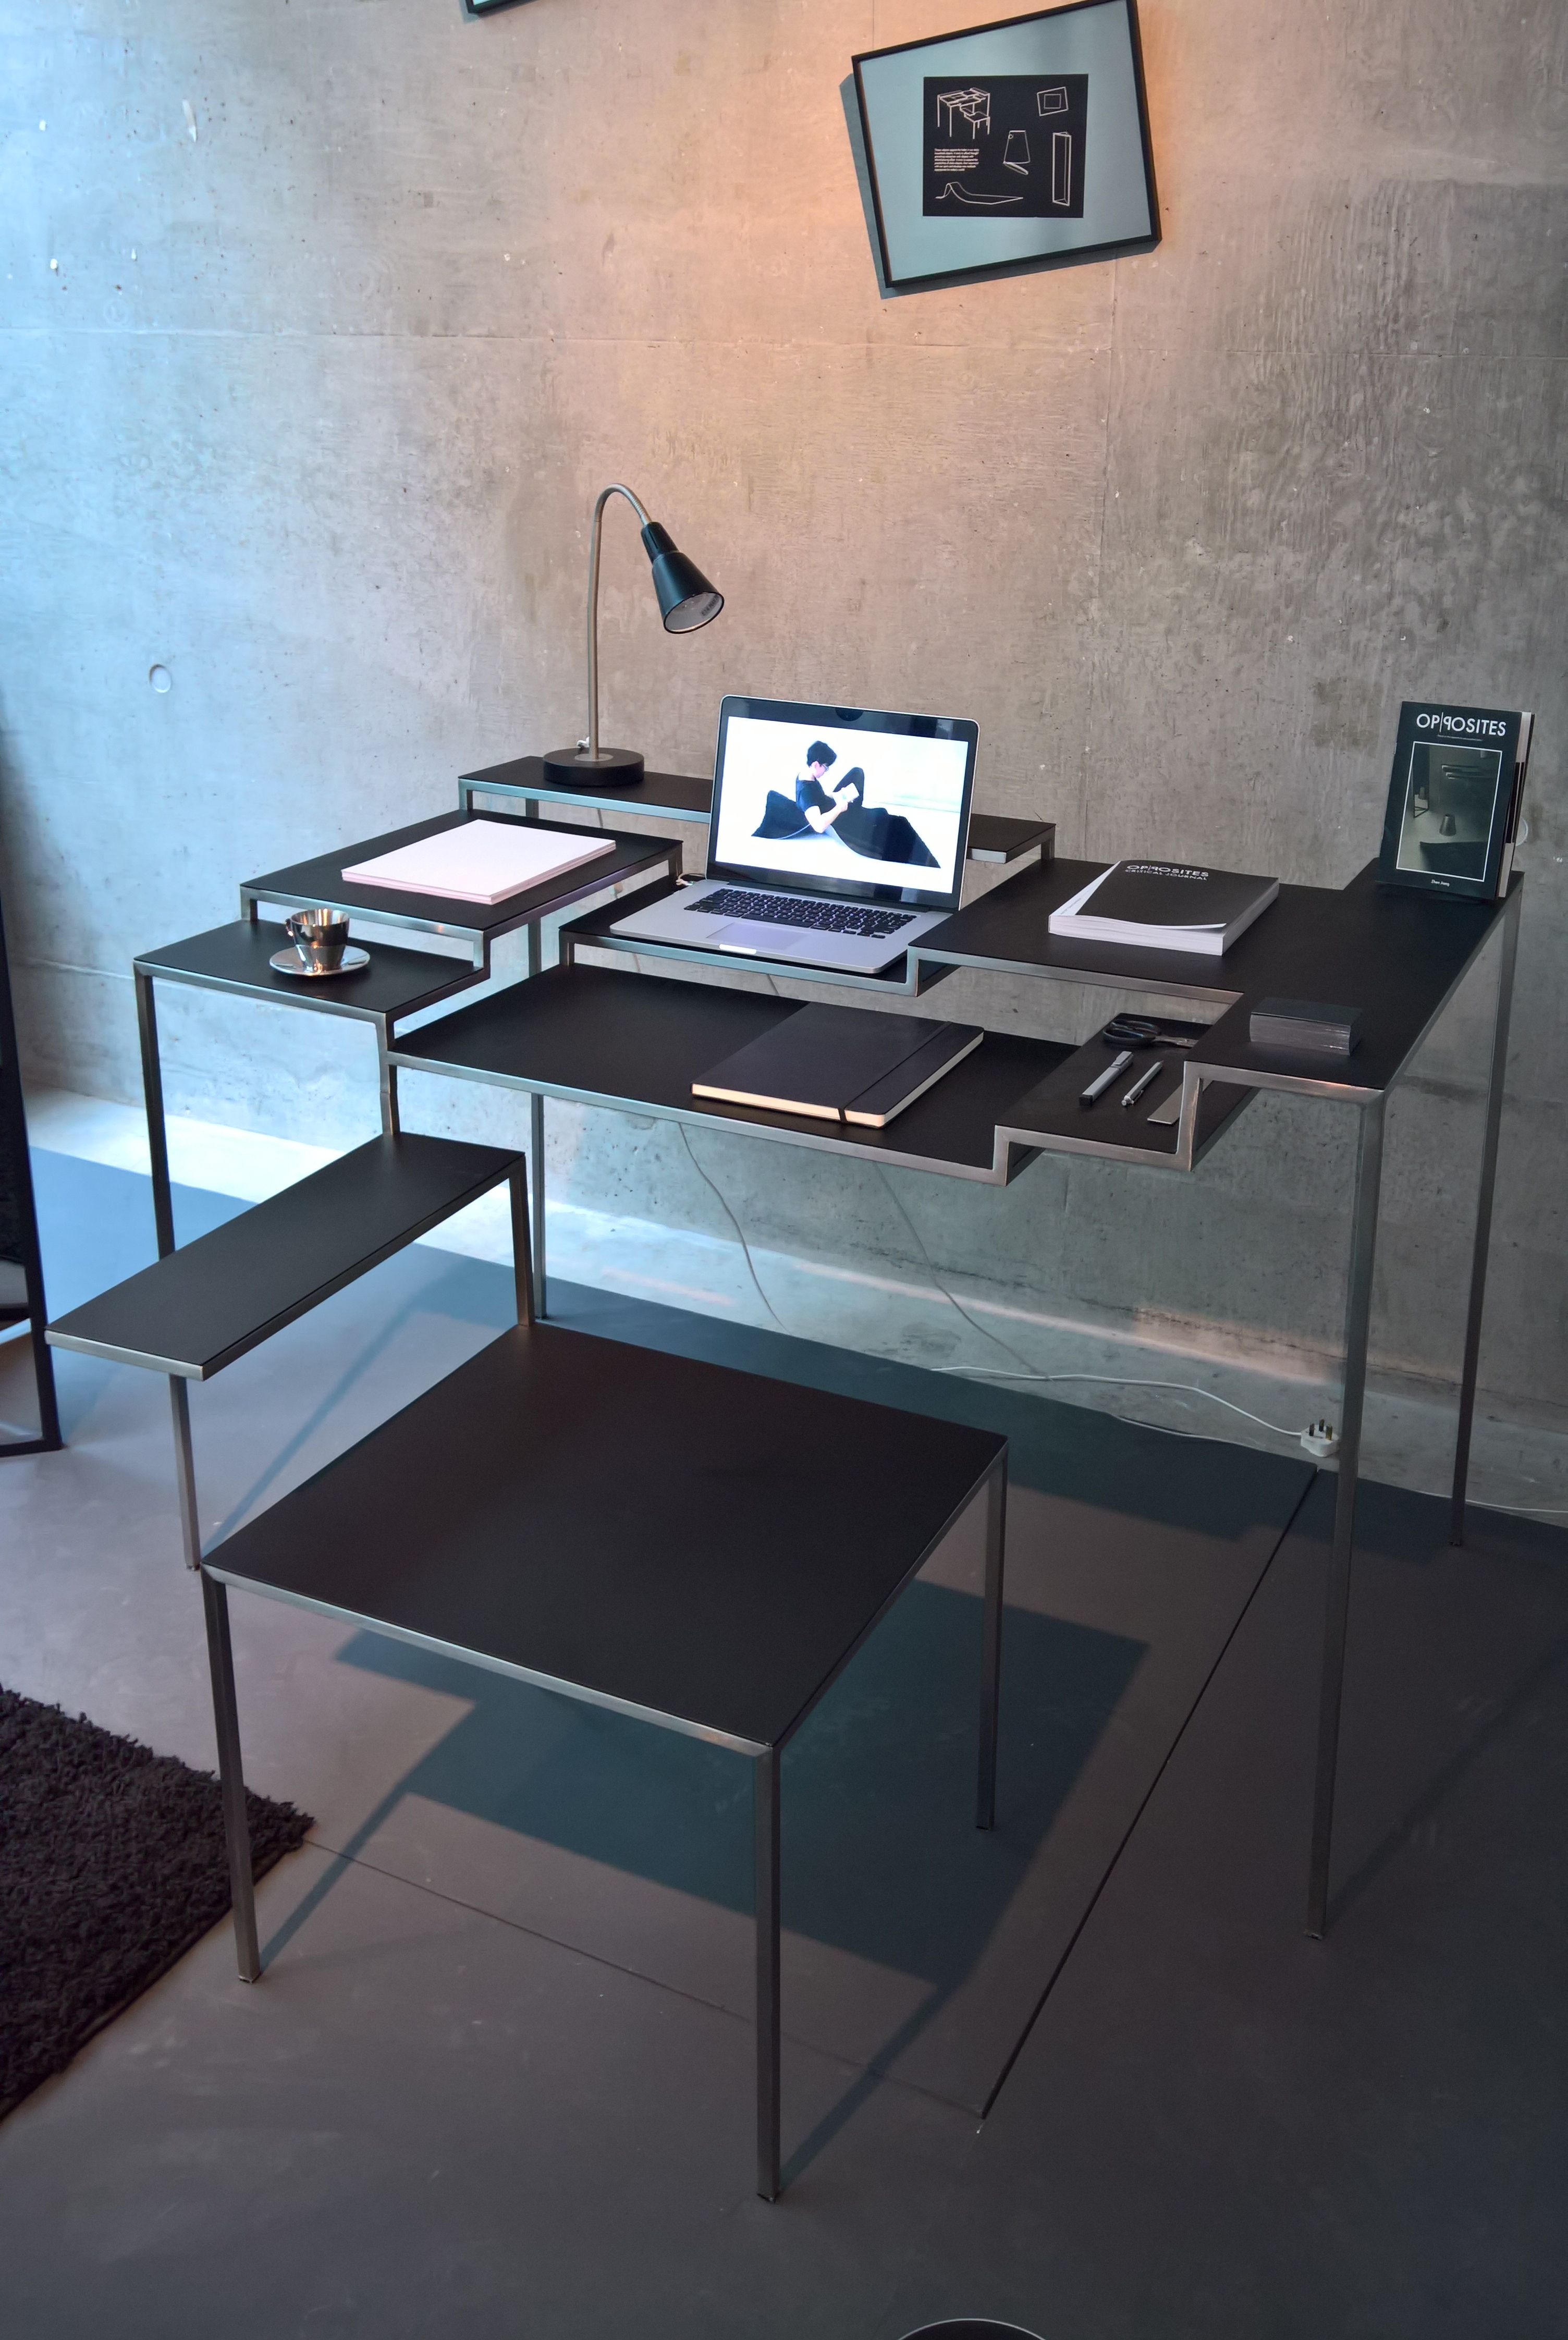 Opposites Desk by Zhen Jiang, as seen at Central St Martins, London Degree Show 2017